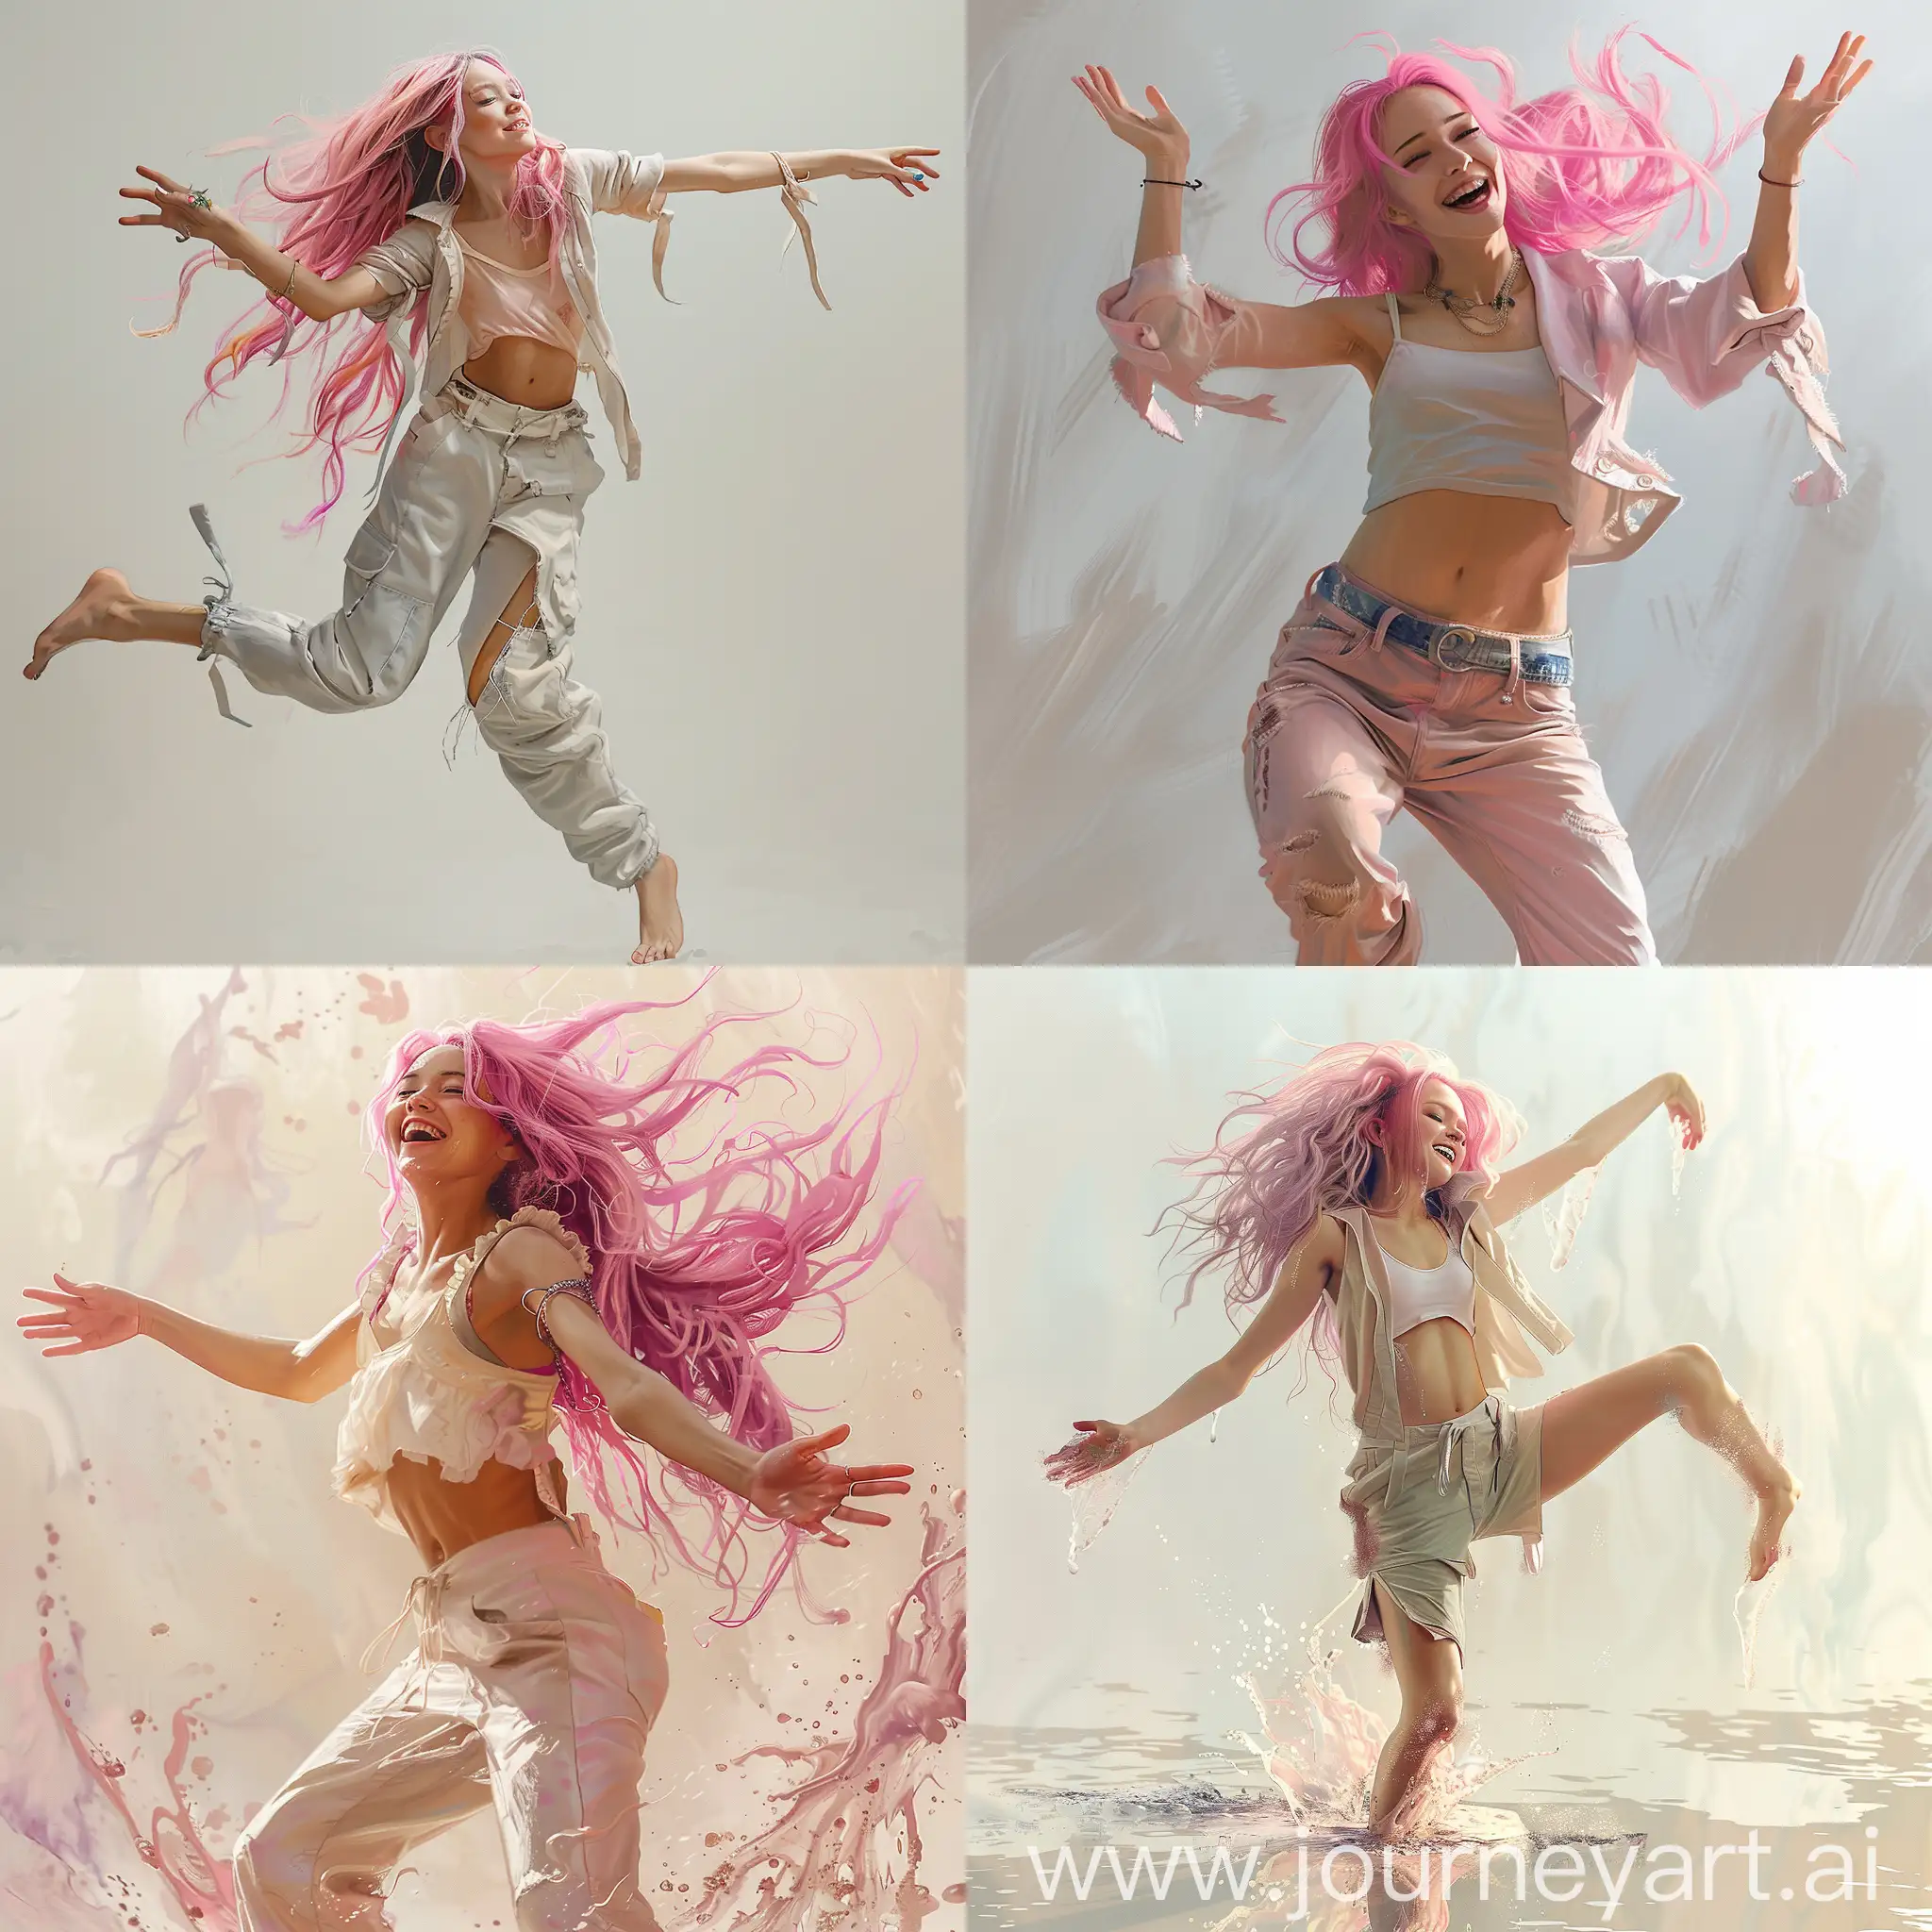 Ethereal-Dance-Beautiful-Girl-Lost-in-Ecstatic-Reverie-with-Pink-Hair-and-Dramatic-Emotion